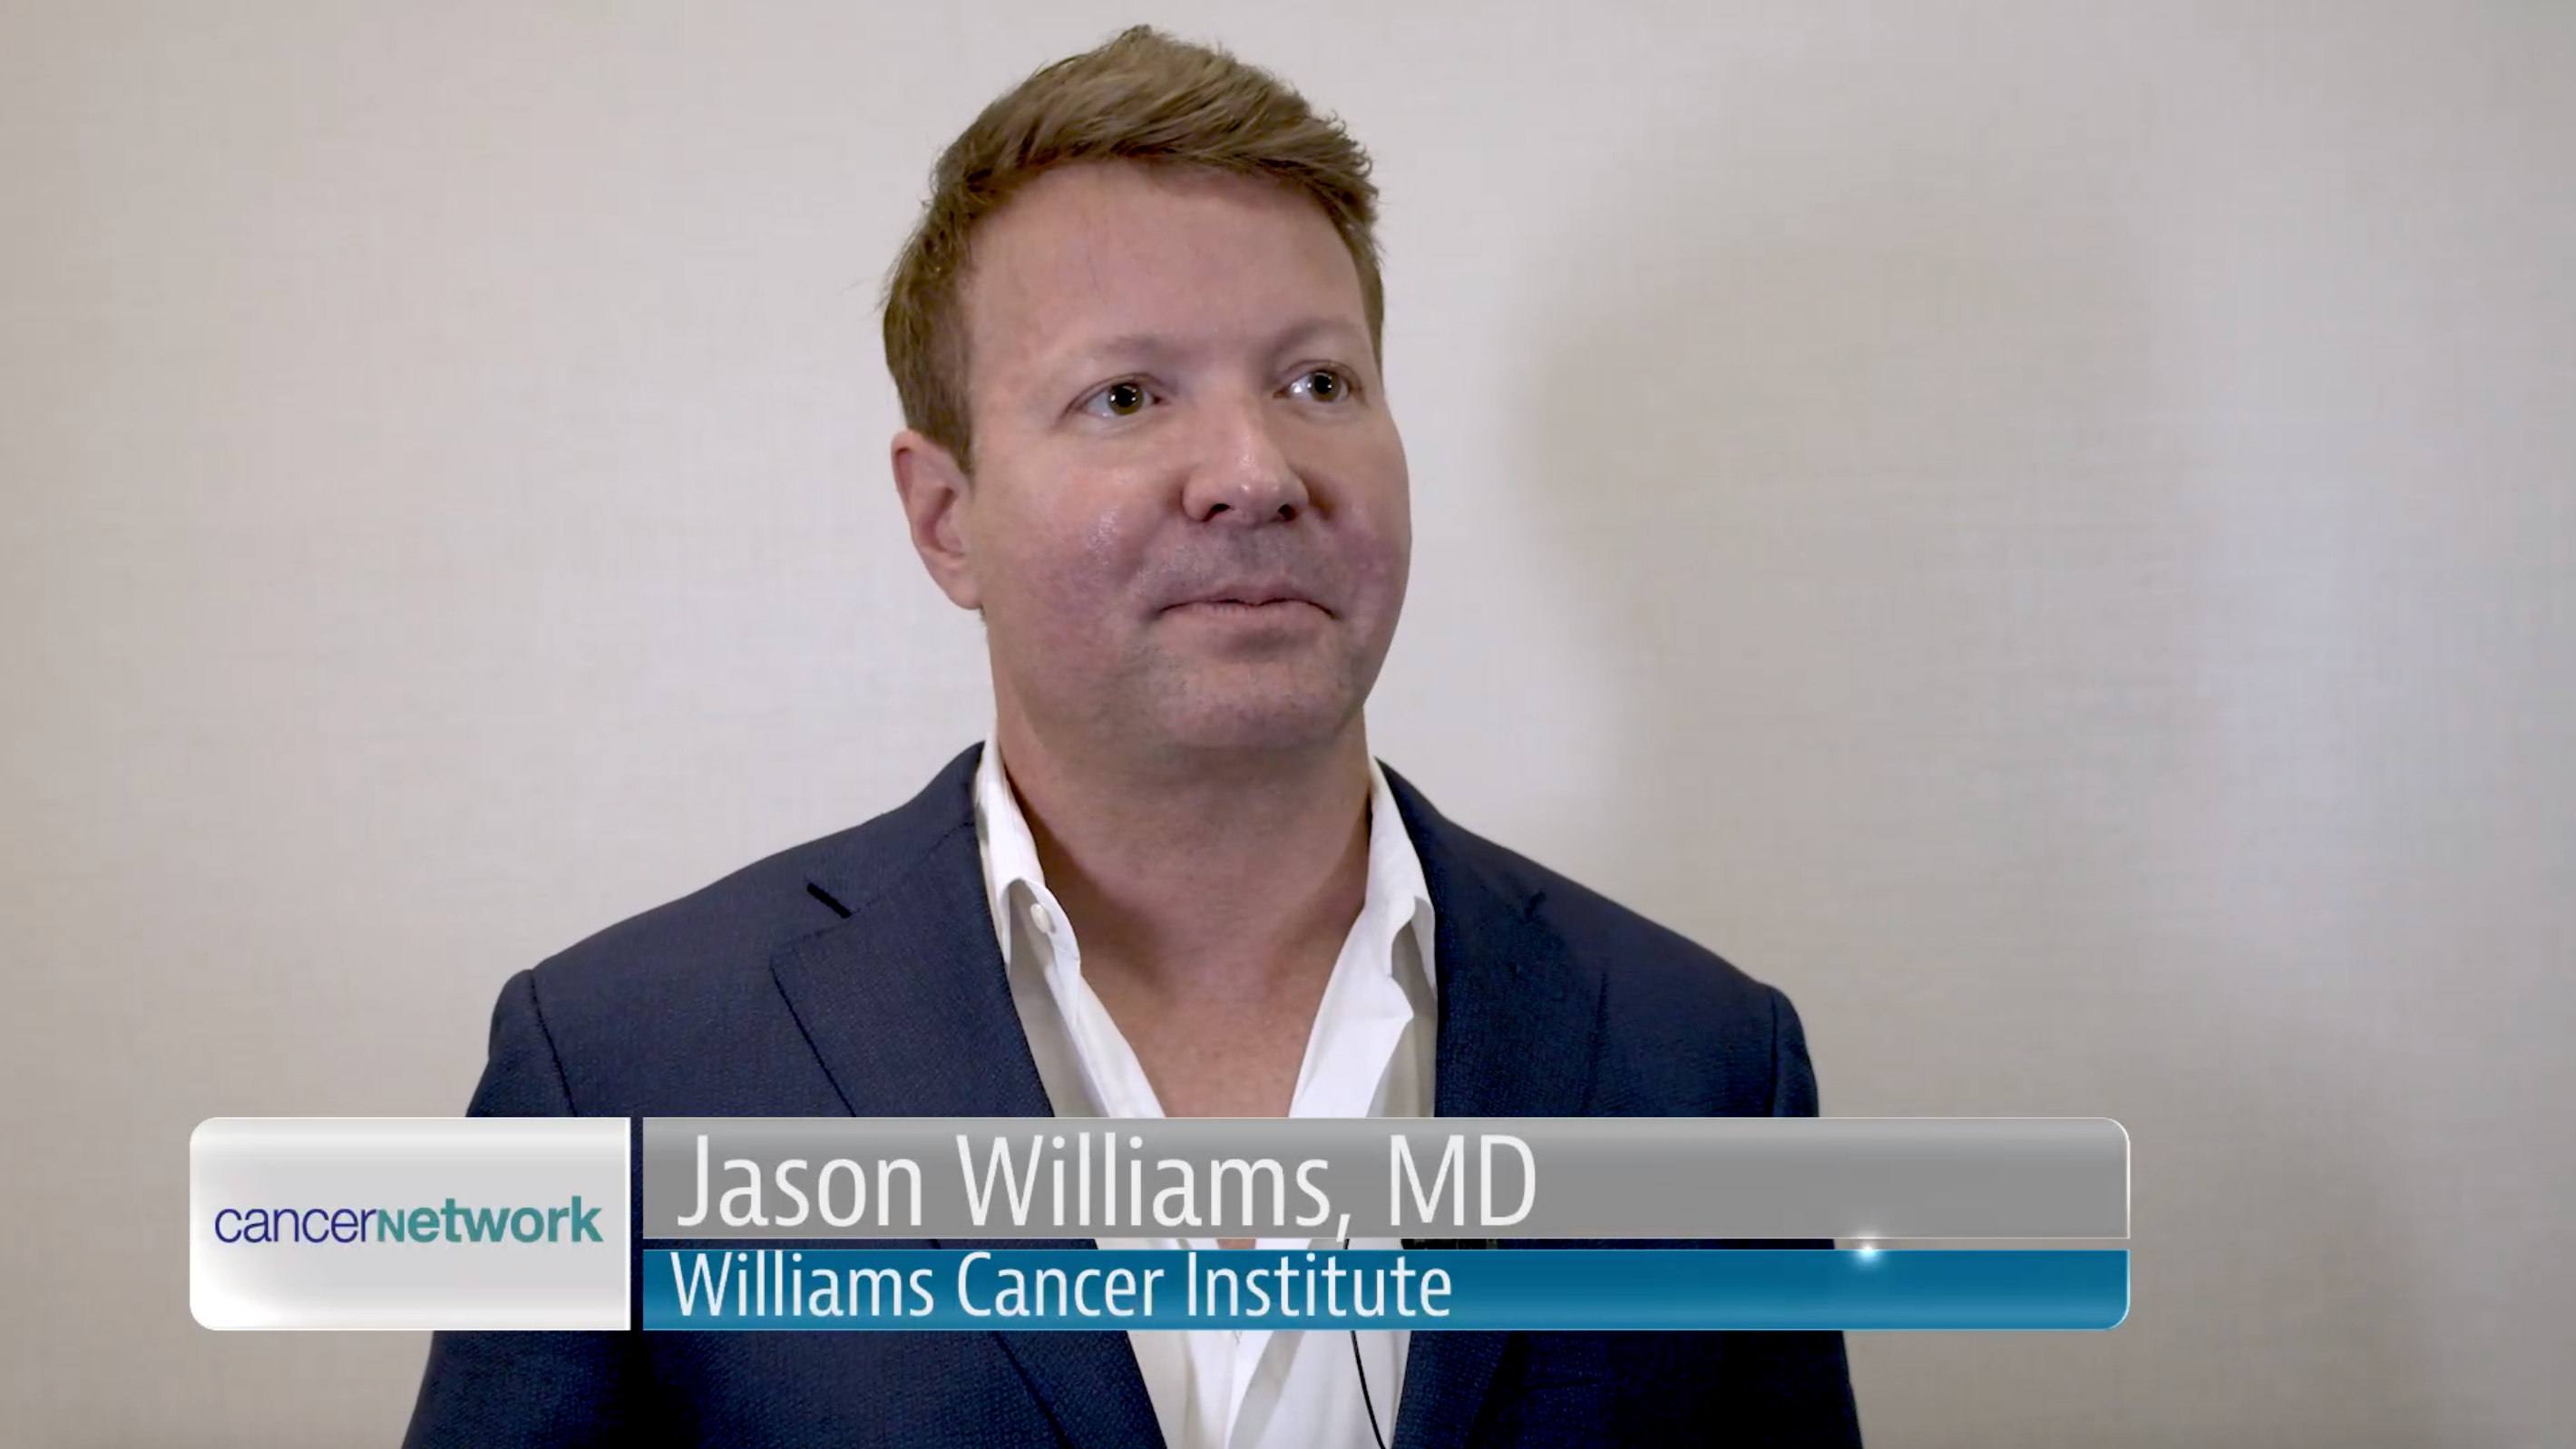 Jason Williams, MD, on Intratumoral Immunotherapy Advances at SITC 2019